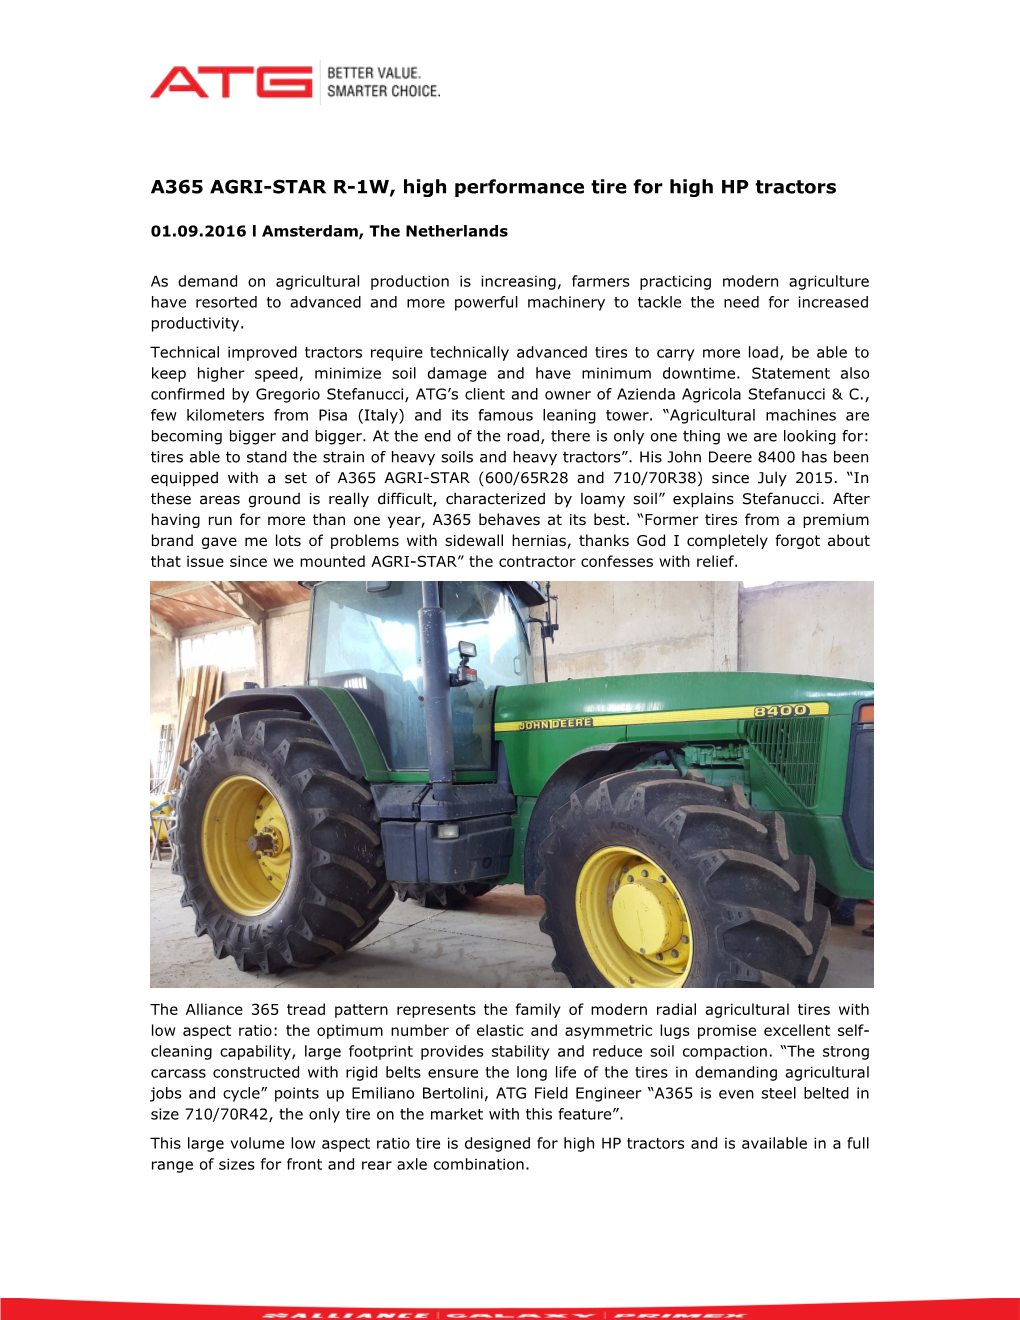 A365 AGRI-STAR R-1W, High Performance Tire for High HP Tractors